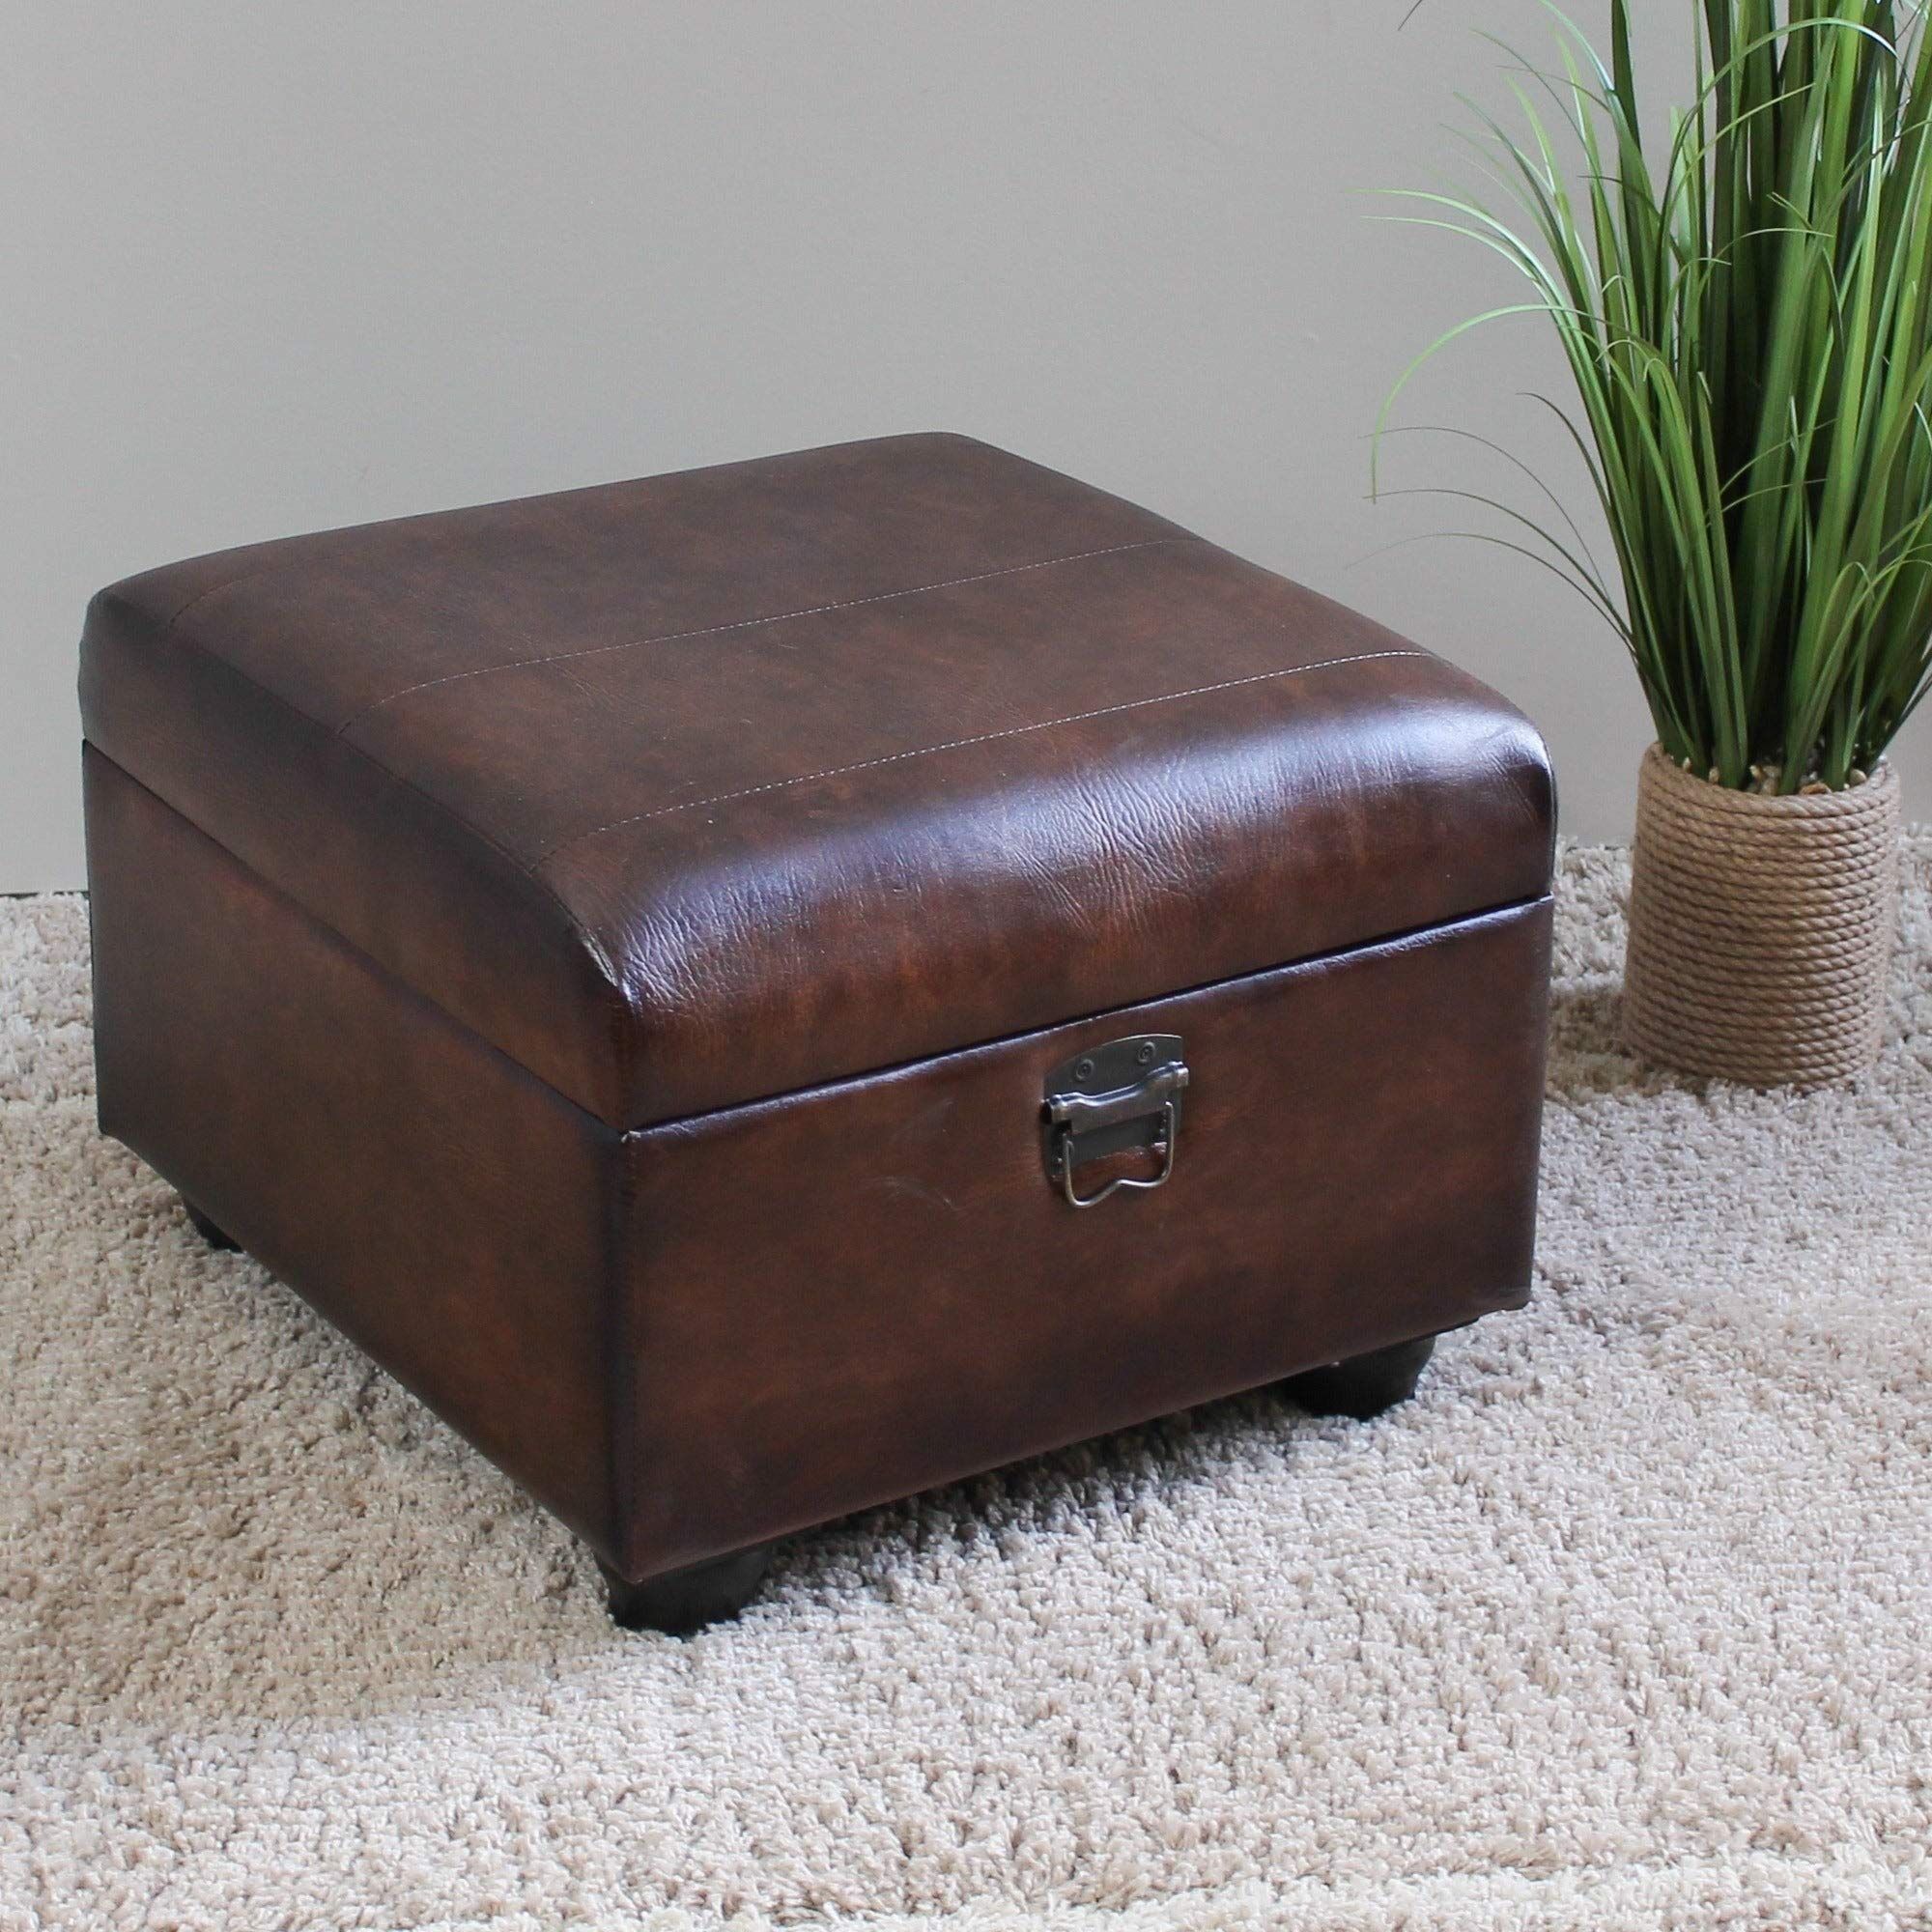 Carmel Ottoman Trunk With Lid – Dark Chocolate Large/medium Inside Round Beige Faux Leather Ottomans With Pull Tab (View 3 of 20)